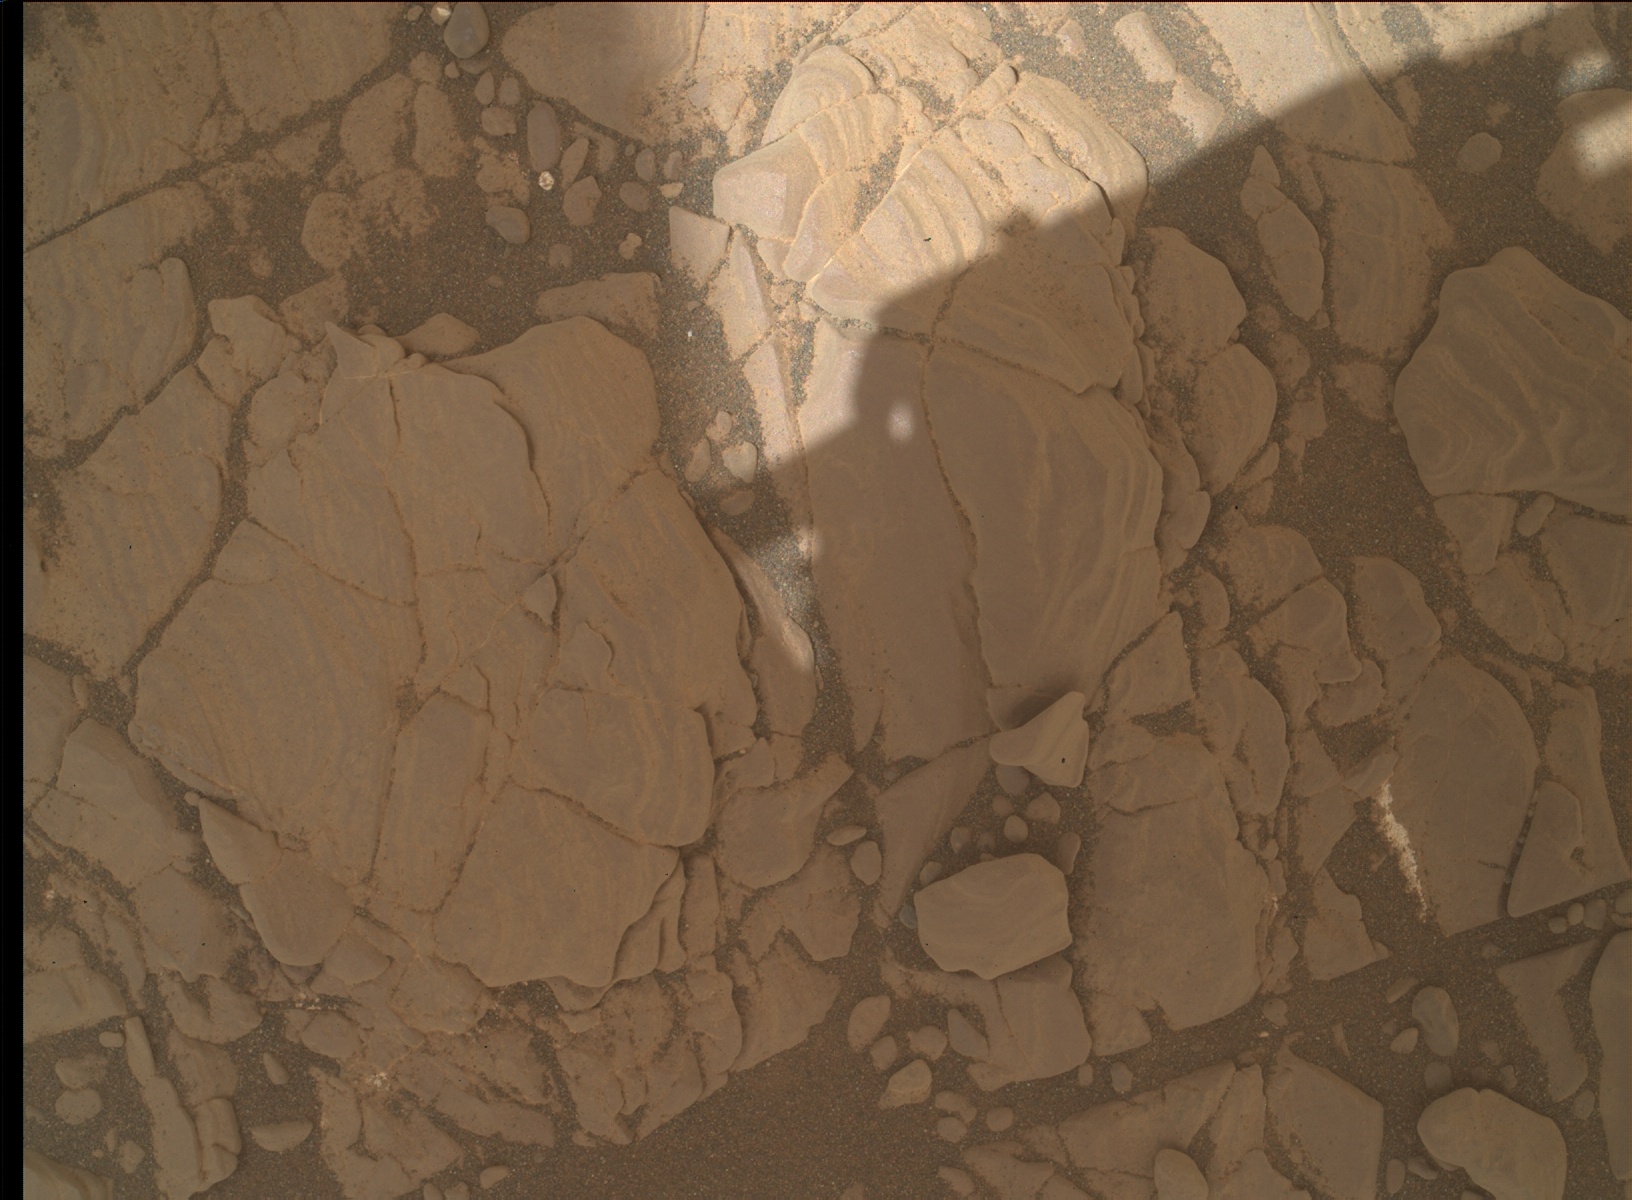 Nasa's Mars rover Curiosity acquired this image using its Mars Hand Lens Imager (MAHLI) on Sol 2938